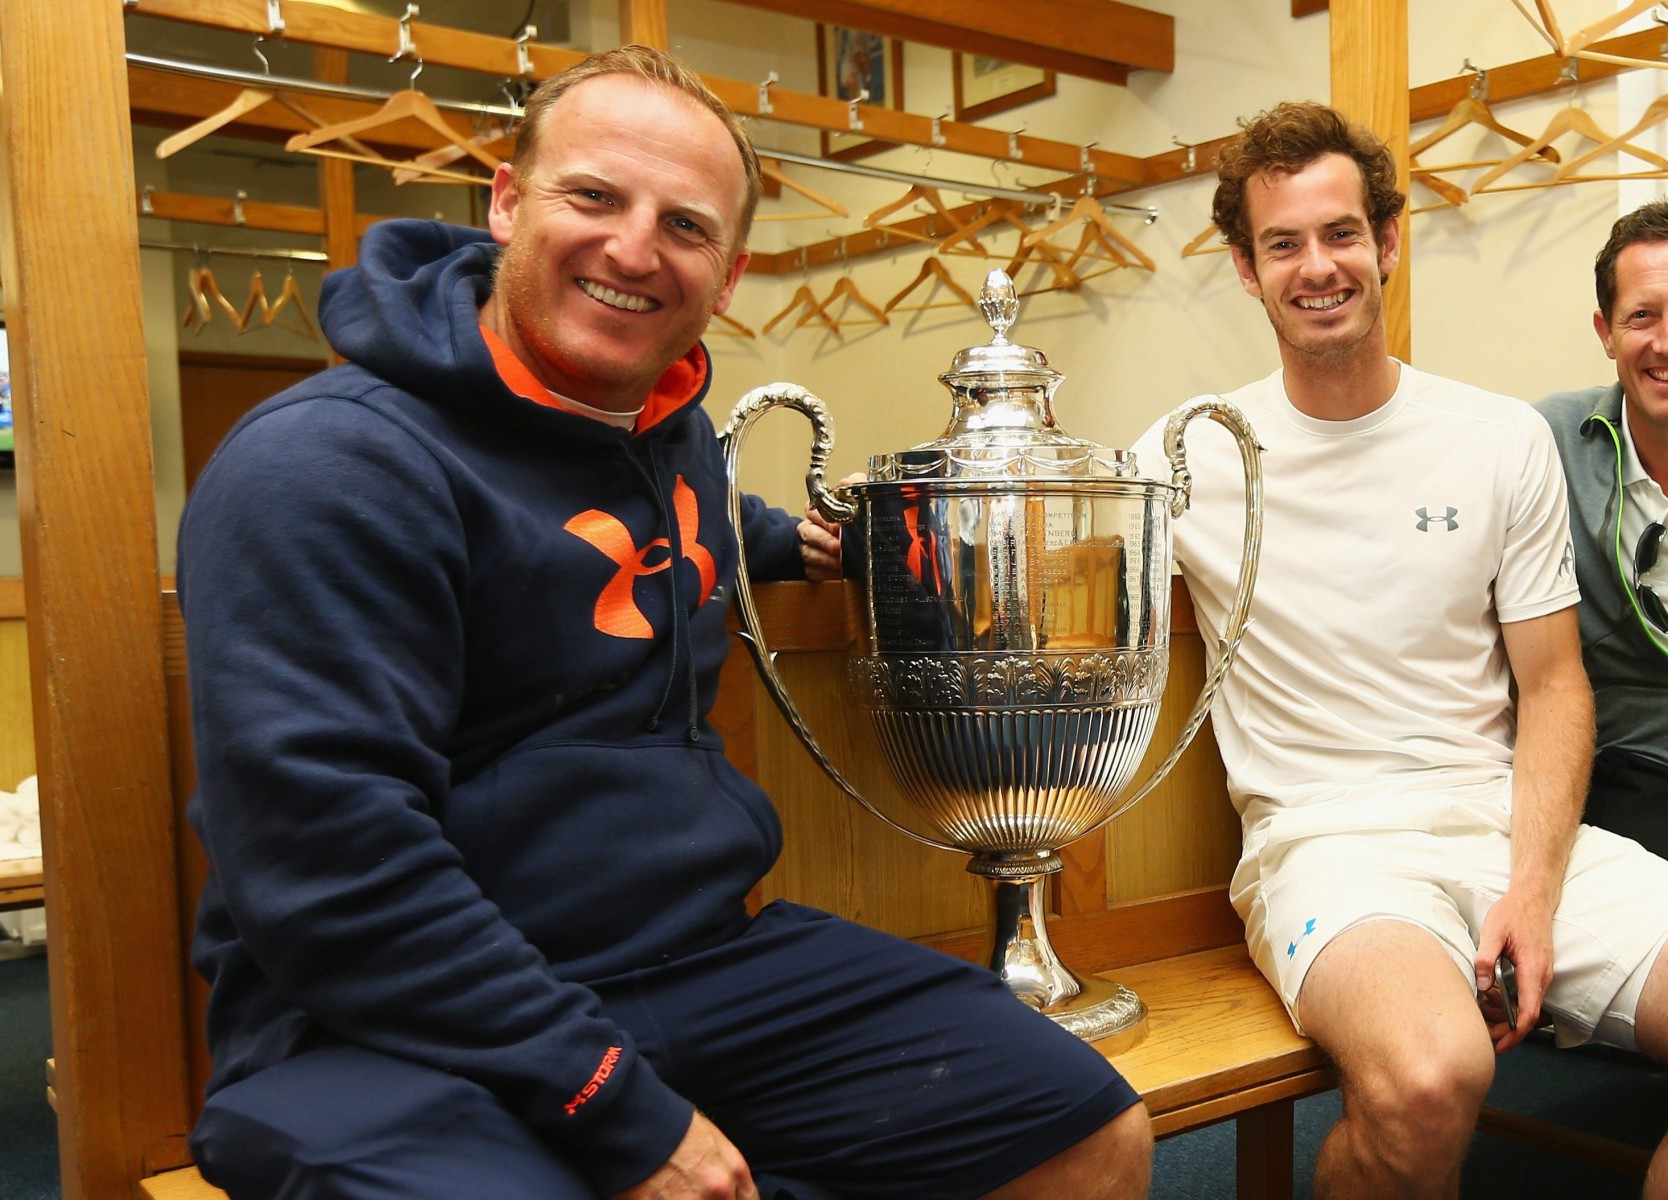 , Andy Murrays coach Andy Little says former Wimbledon champ can reach the top again after injury